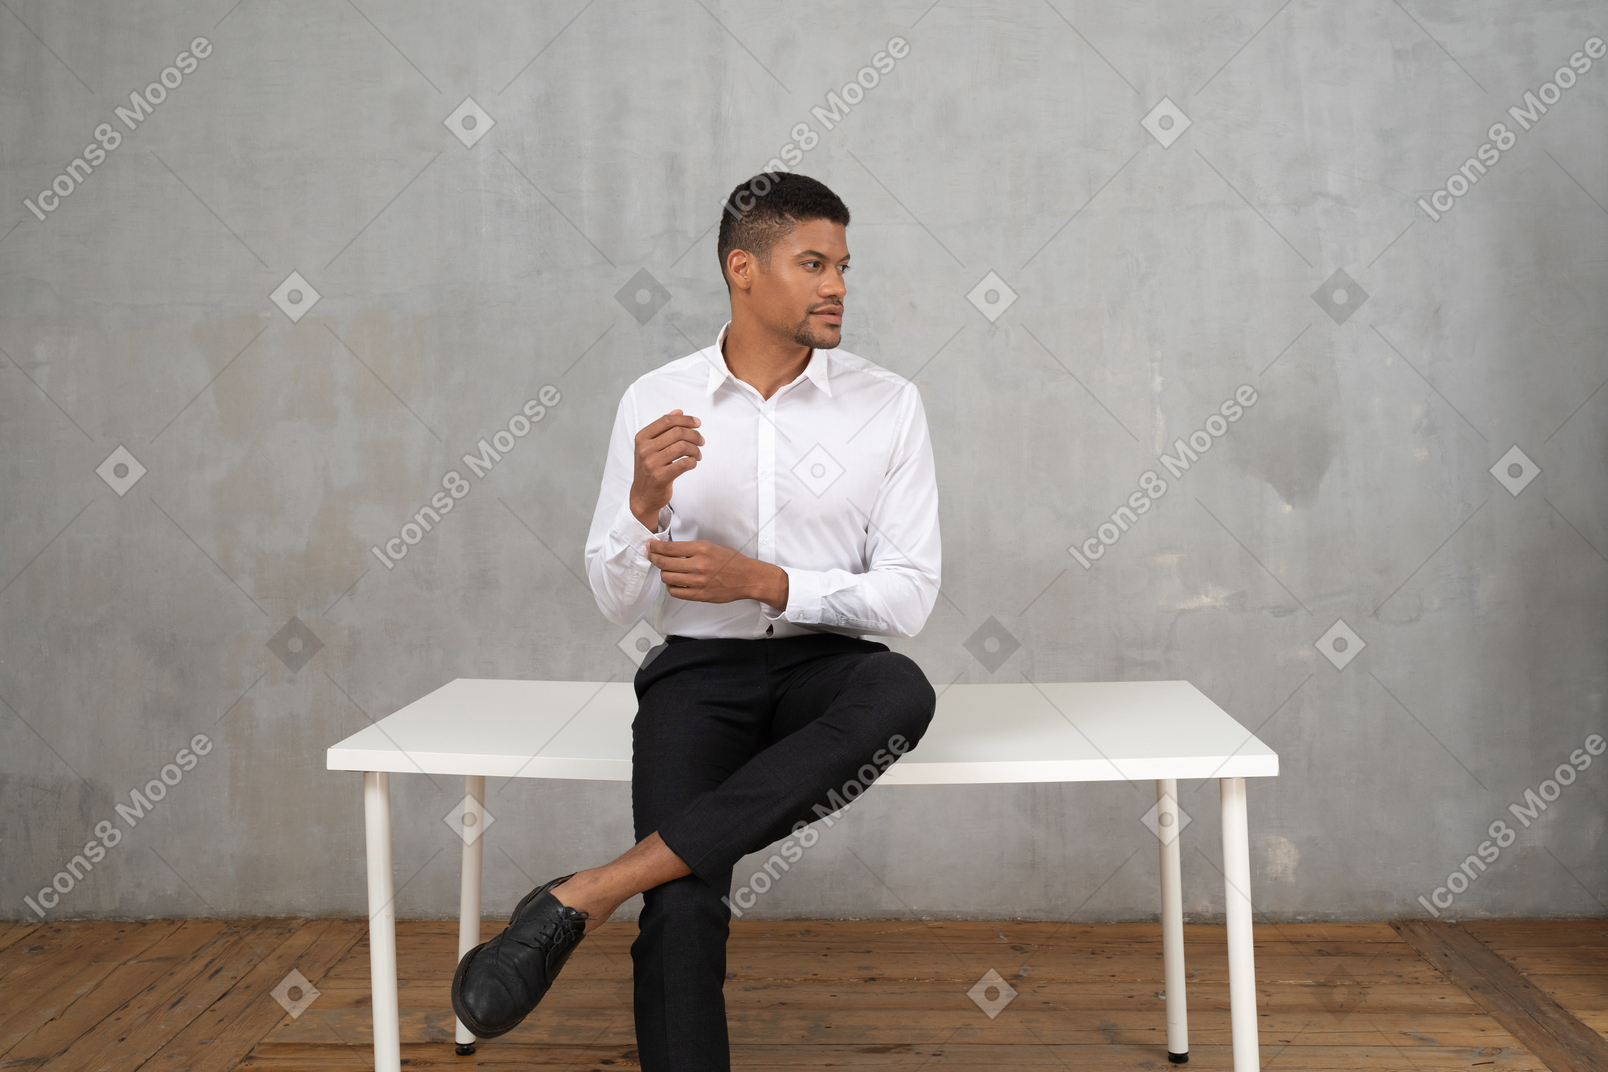 Man in formal clothes sitting on a table and fixing his cuff